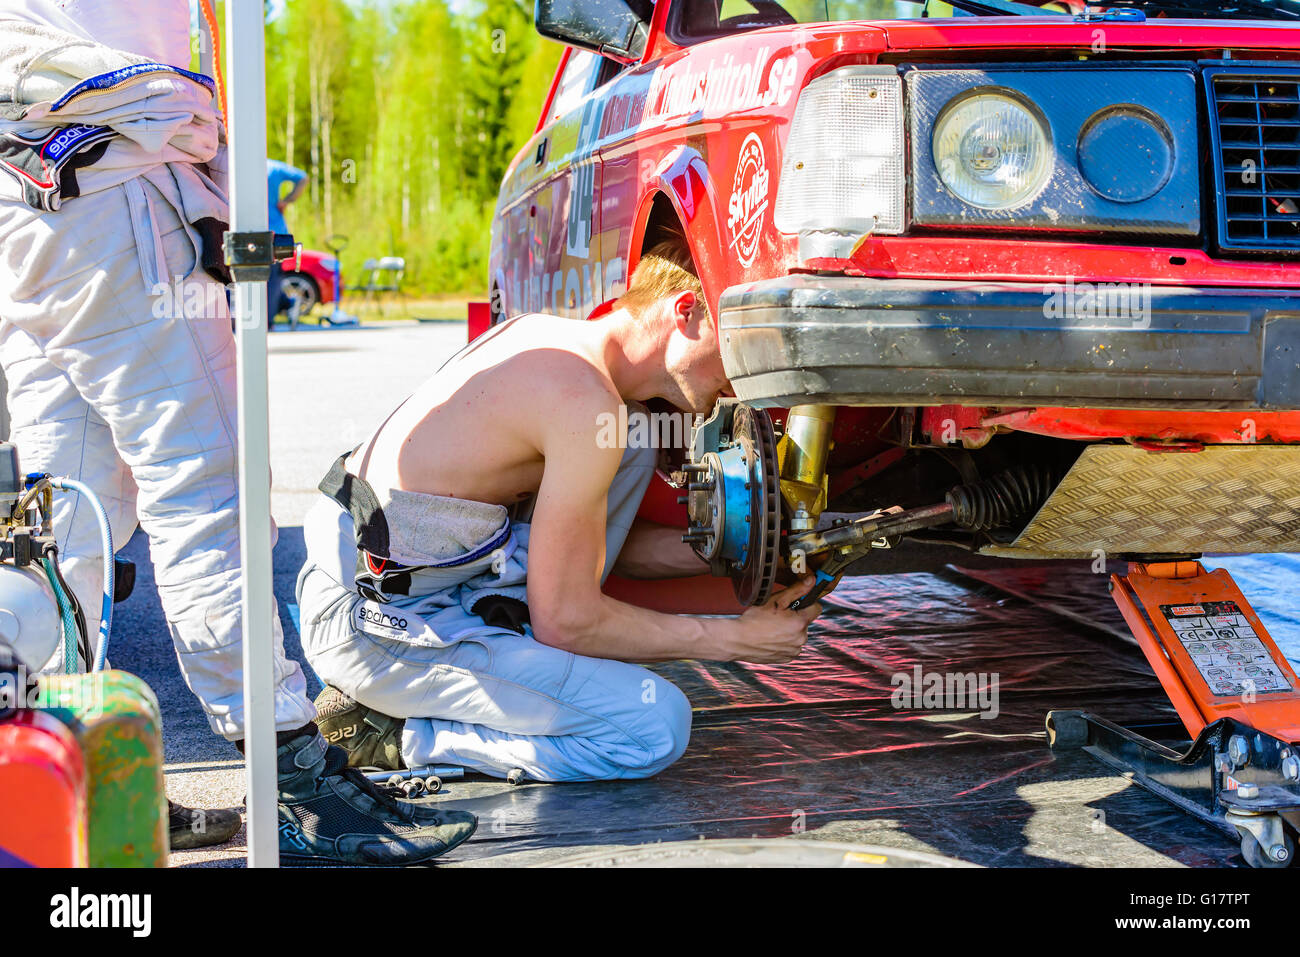 Emmaboda, Sweden - May 7, 2016: 41st South Swedish Rally in service depot. Crew working under the front wheelhouse at team Alenm Stock Photo